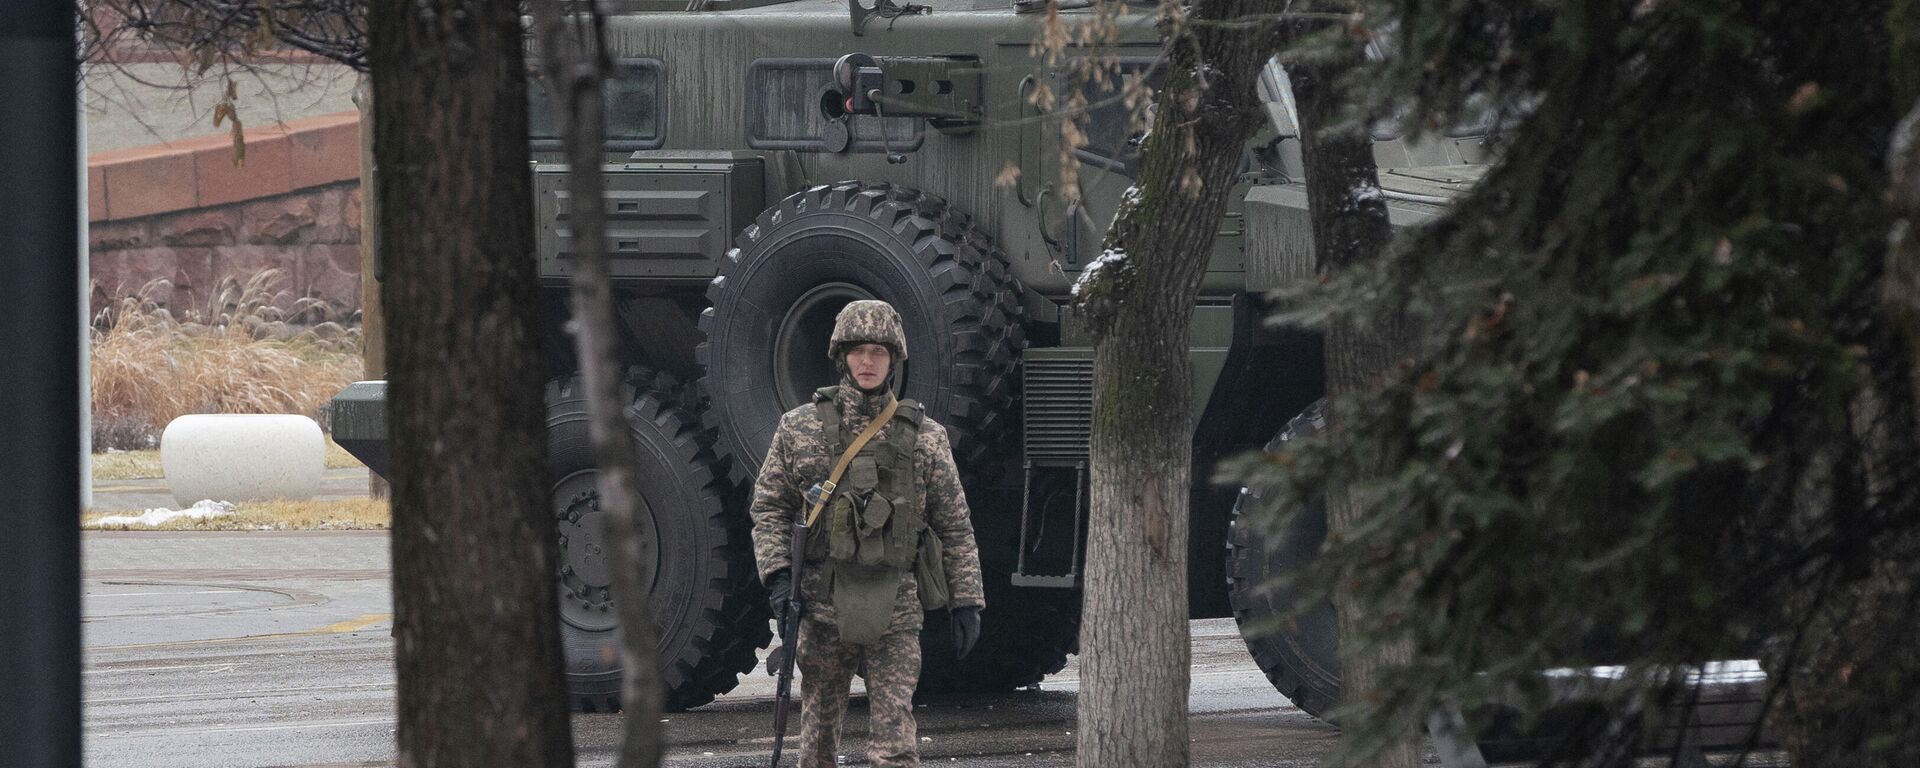 A serviceman patrols a street in central Almaty on January 8, 2022, after violence that erupted following protests over hikes in fuel prices. - Sputnik International, 1920, 09.01.2022